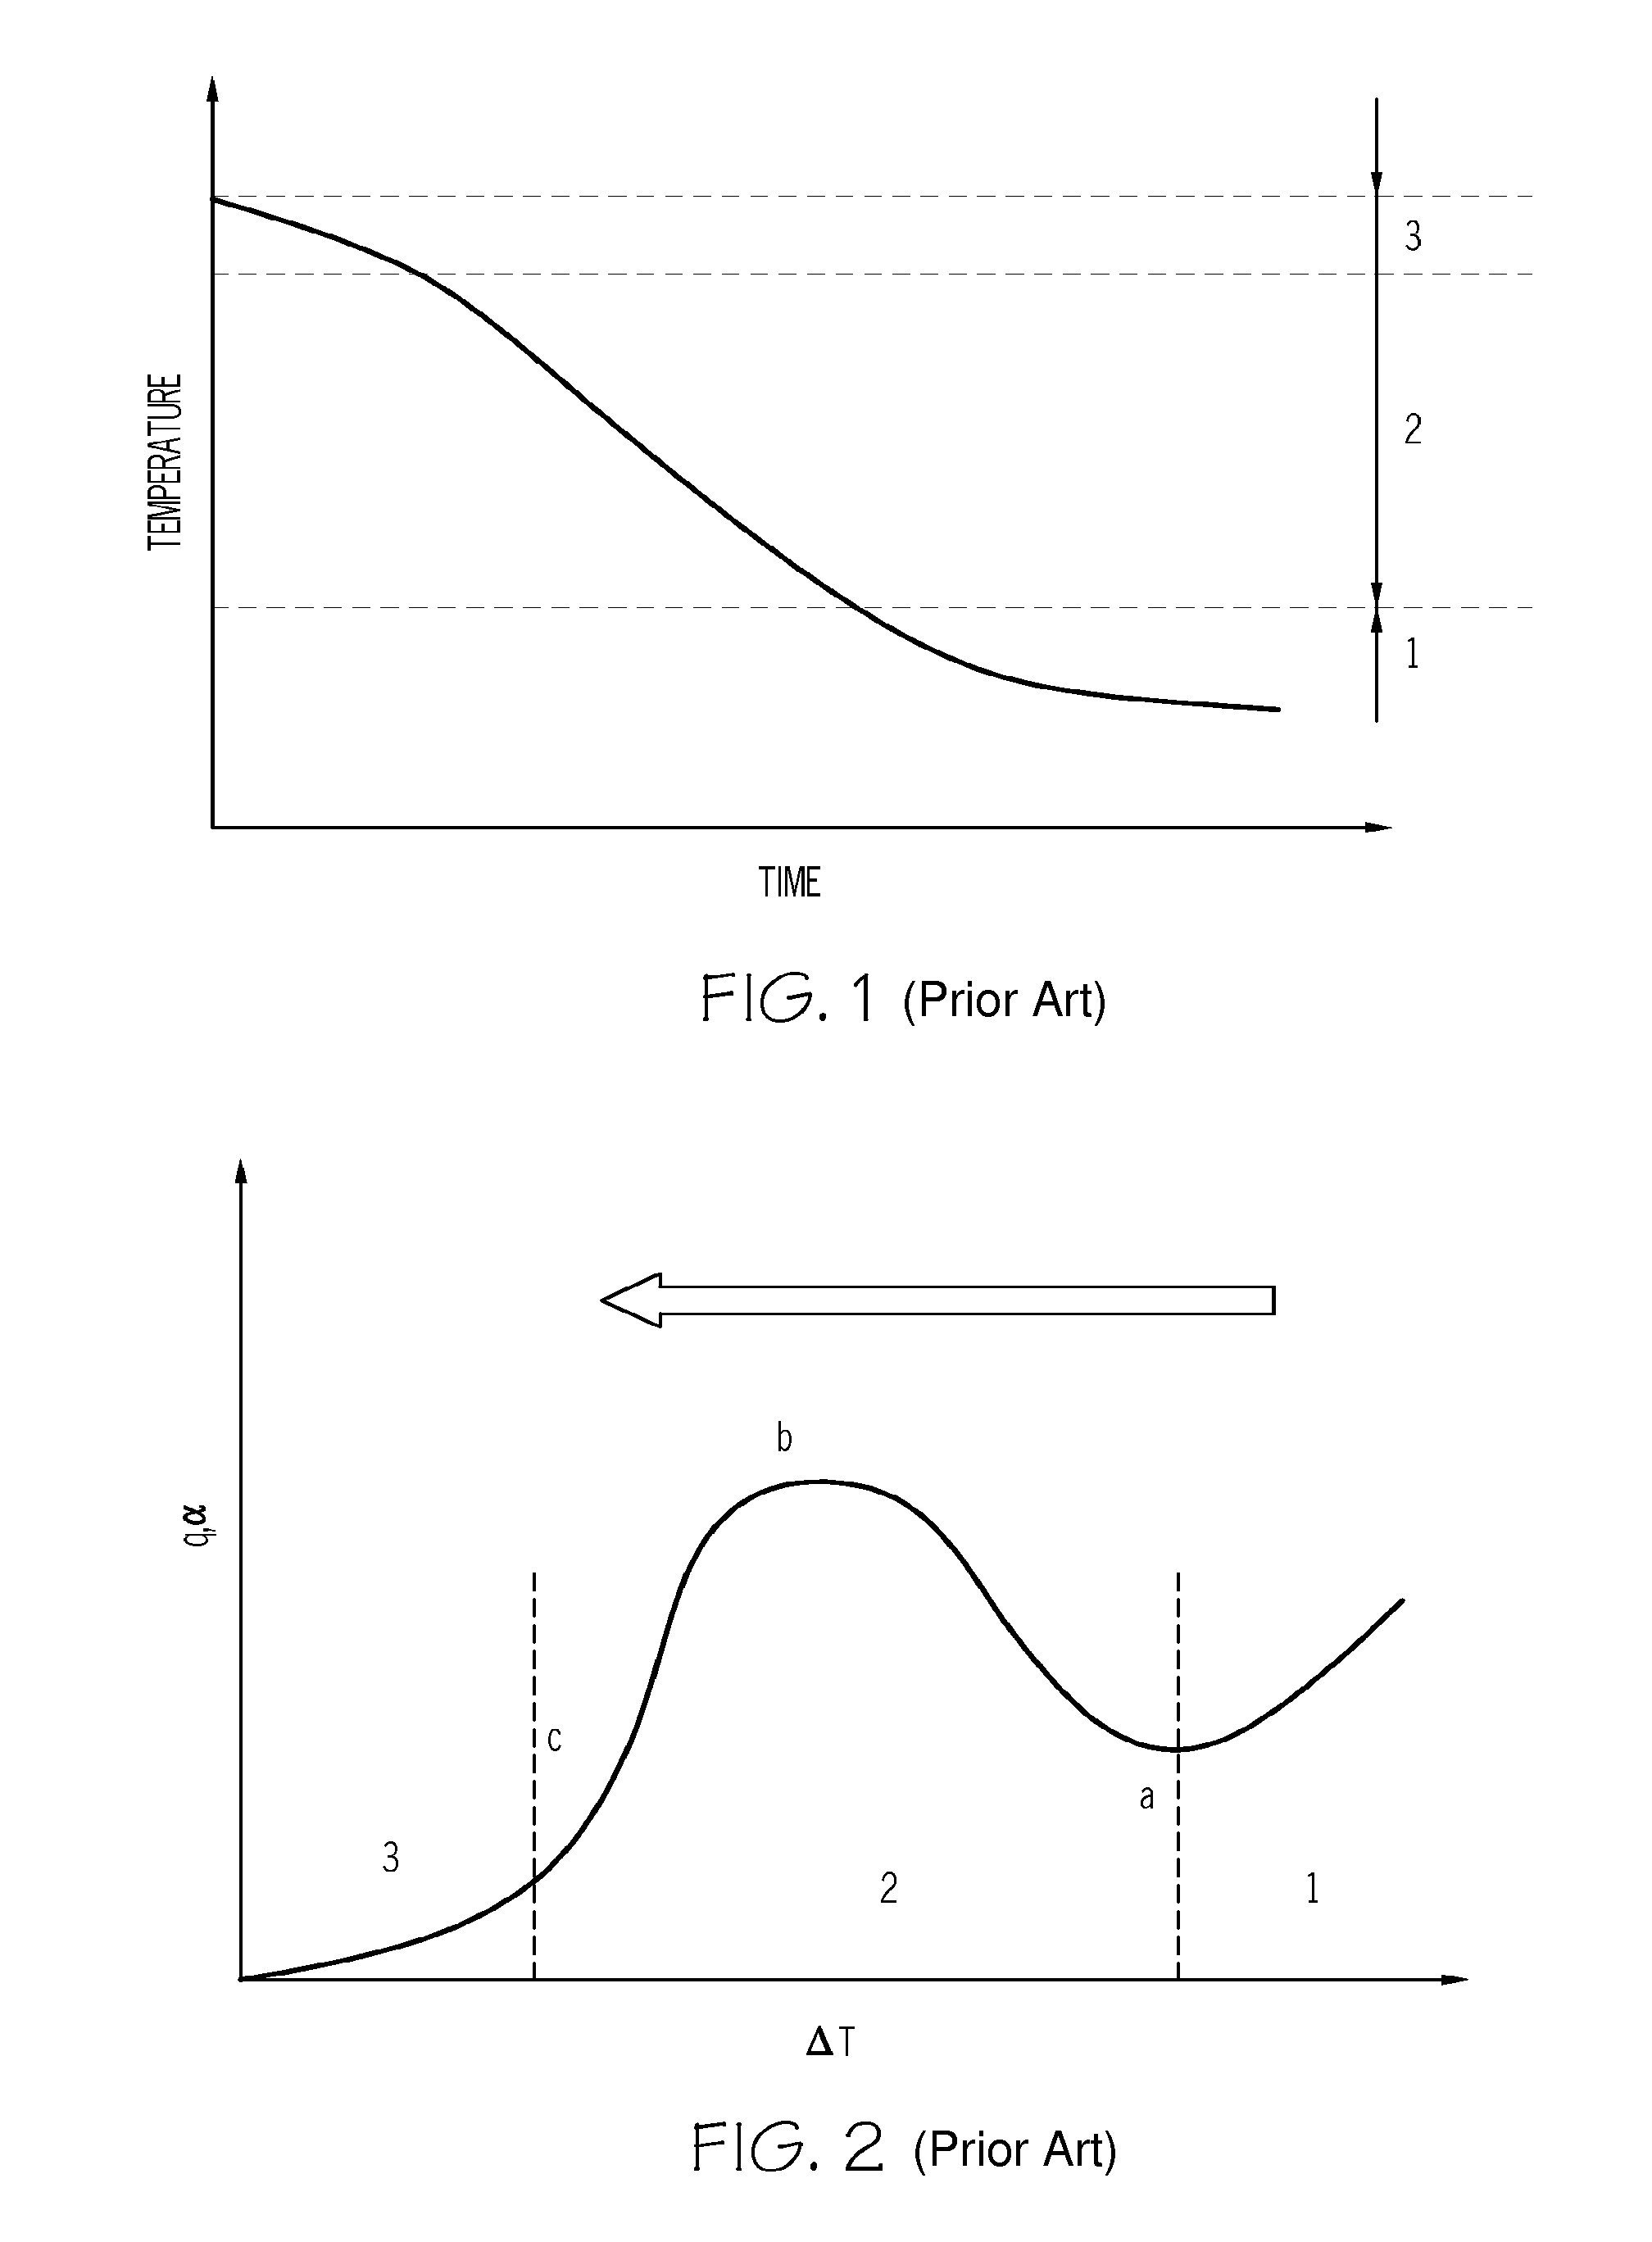 Method for simulating transient heat transfer and temperature distribution of aluminum castings during water quenching